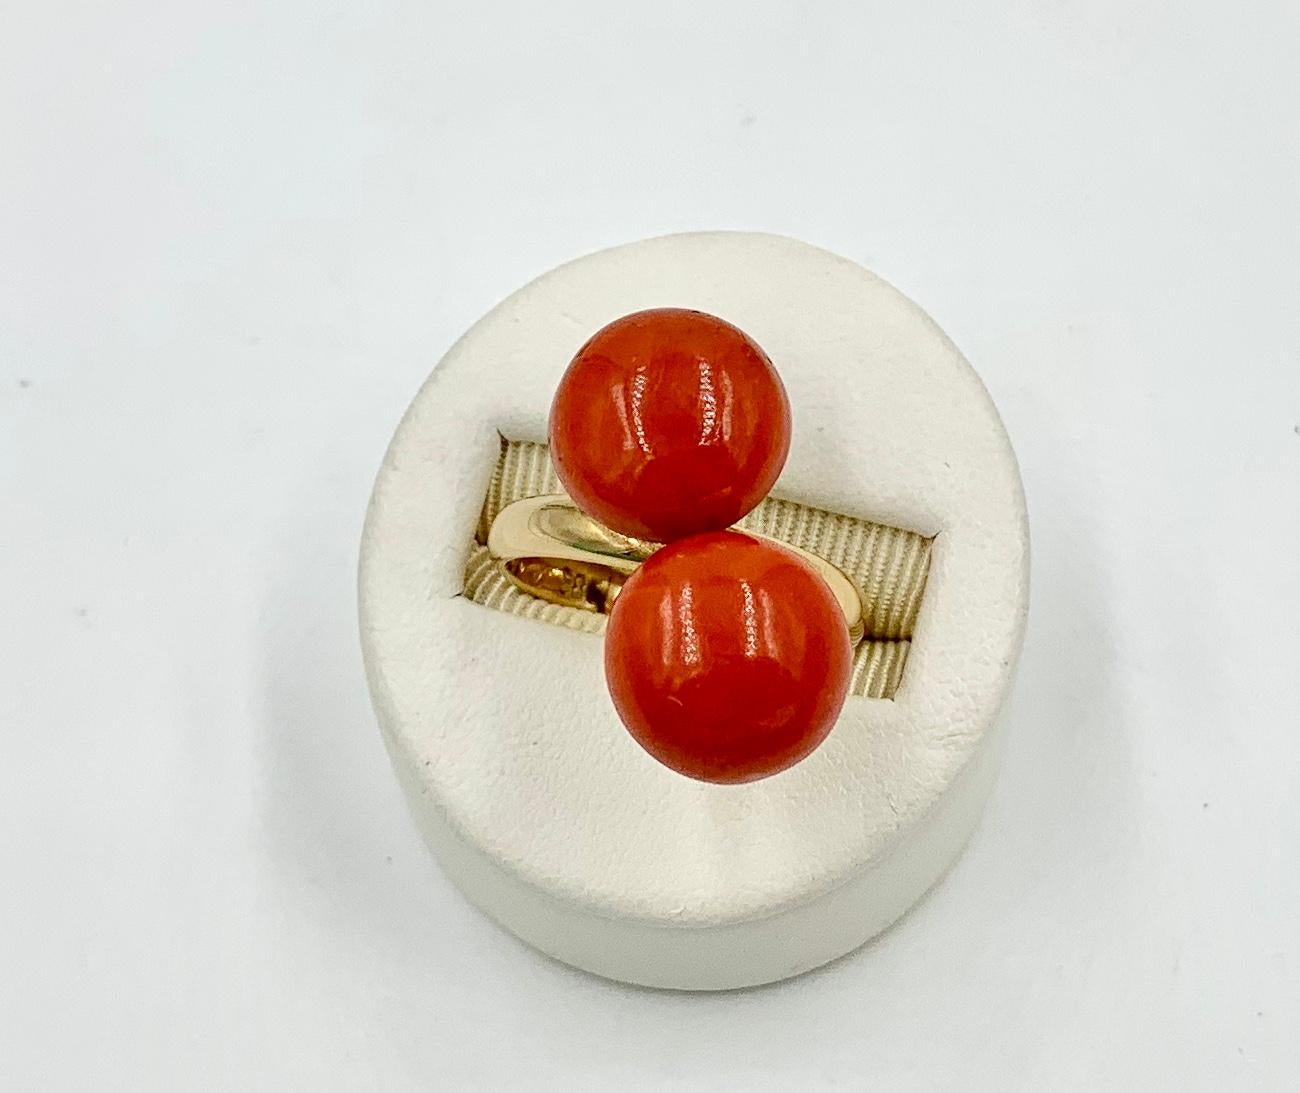 A magnificent original Art Deco Ring with two beautiful natural round Red - Salmon Coral Cabochons set in a stunning Art Deco design in 14 Karat Gold.  The ring is a masterpiece of the Art Deco period with its dramatic color and style yet very clean